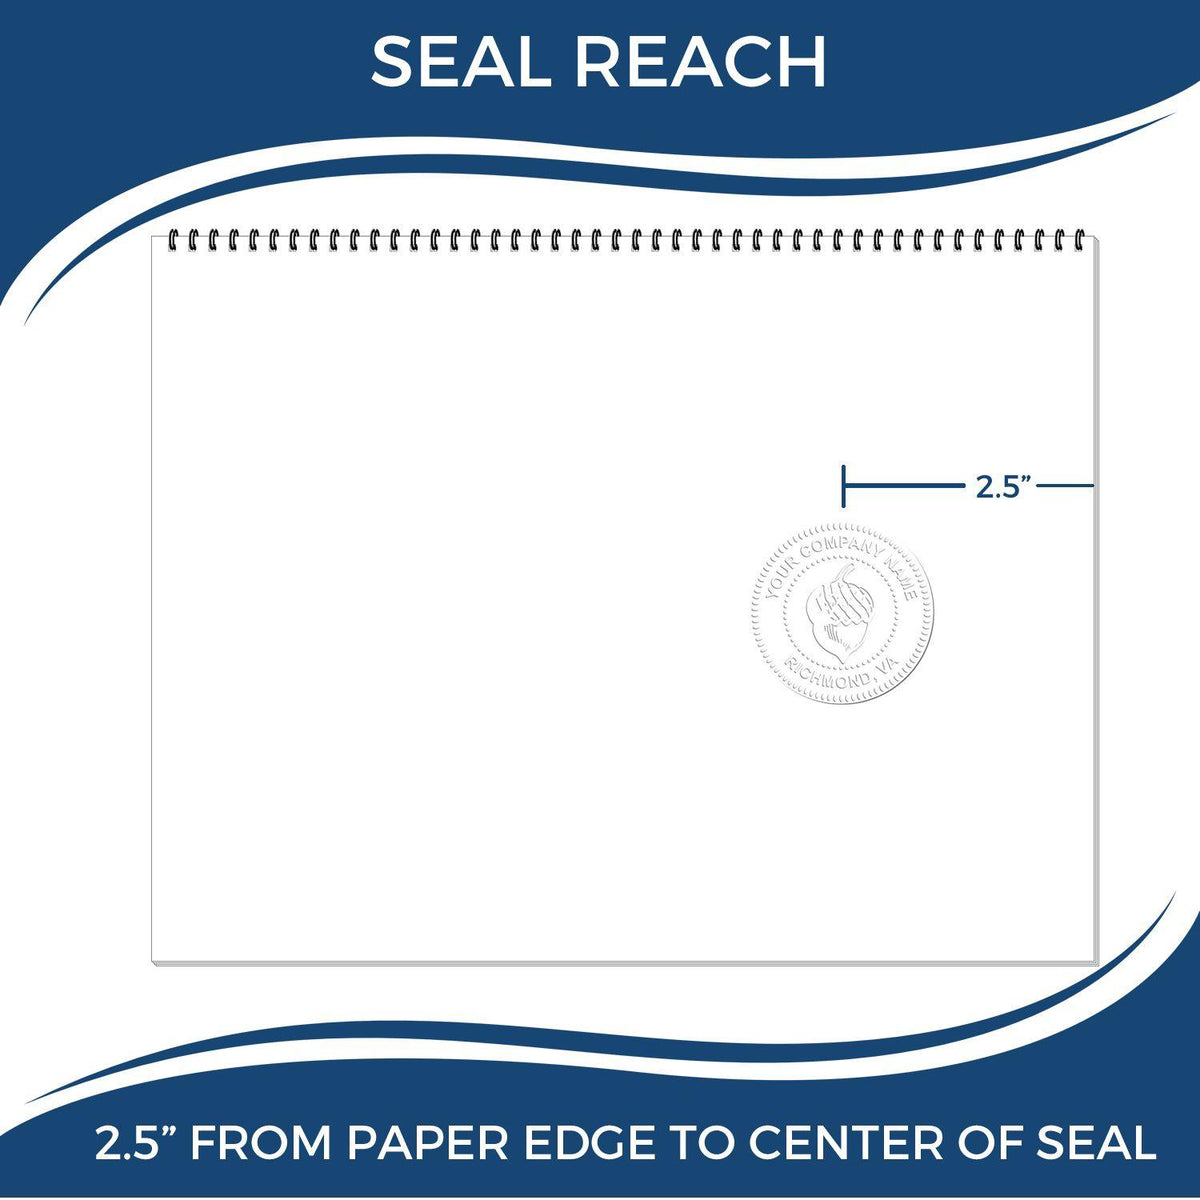 Forester Long Reach Desk Seal Embosser - Engineer Seal Stamps - Embosser Type_Desk, Embosser Type_Long Reach, Type of Use_Professional, Use_Heavy Duty, validate-product-description